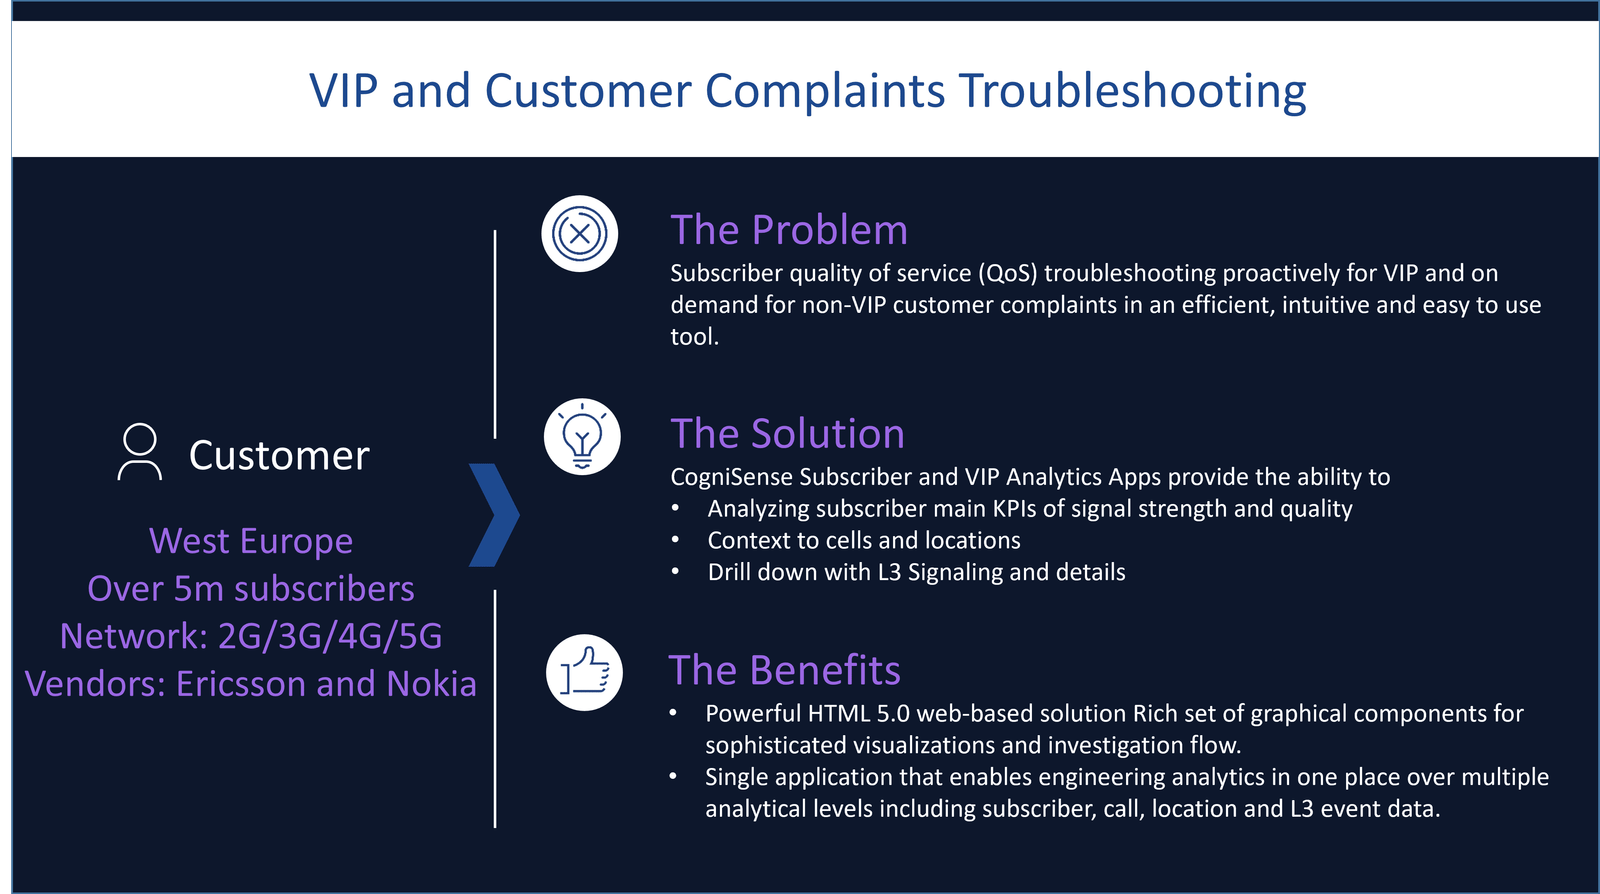 VIP and Customer Complaints Troubleshooting